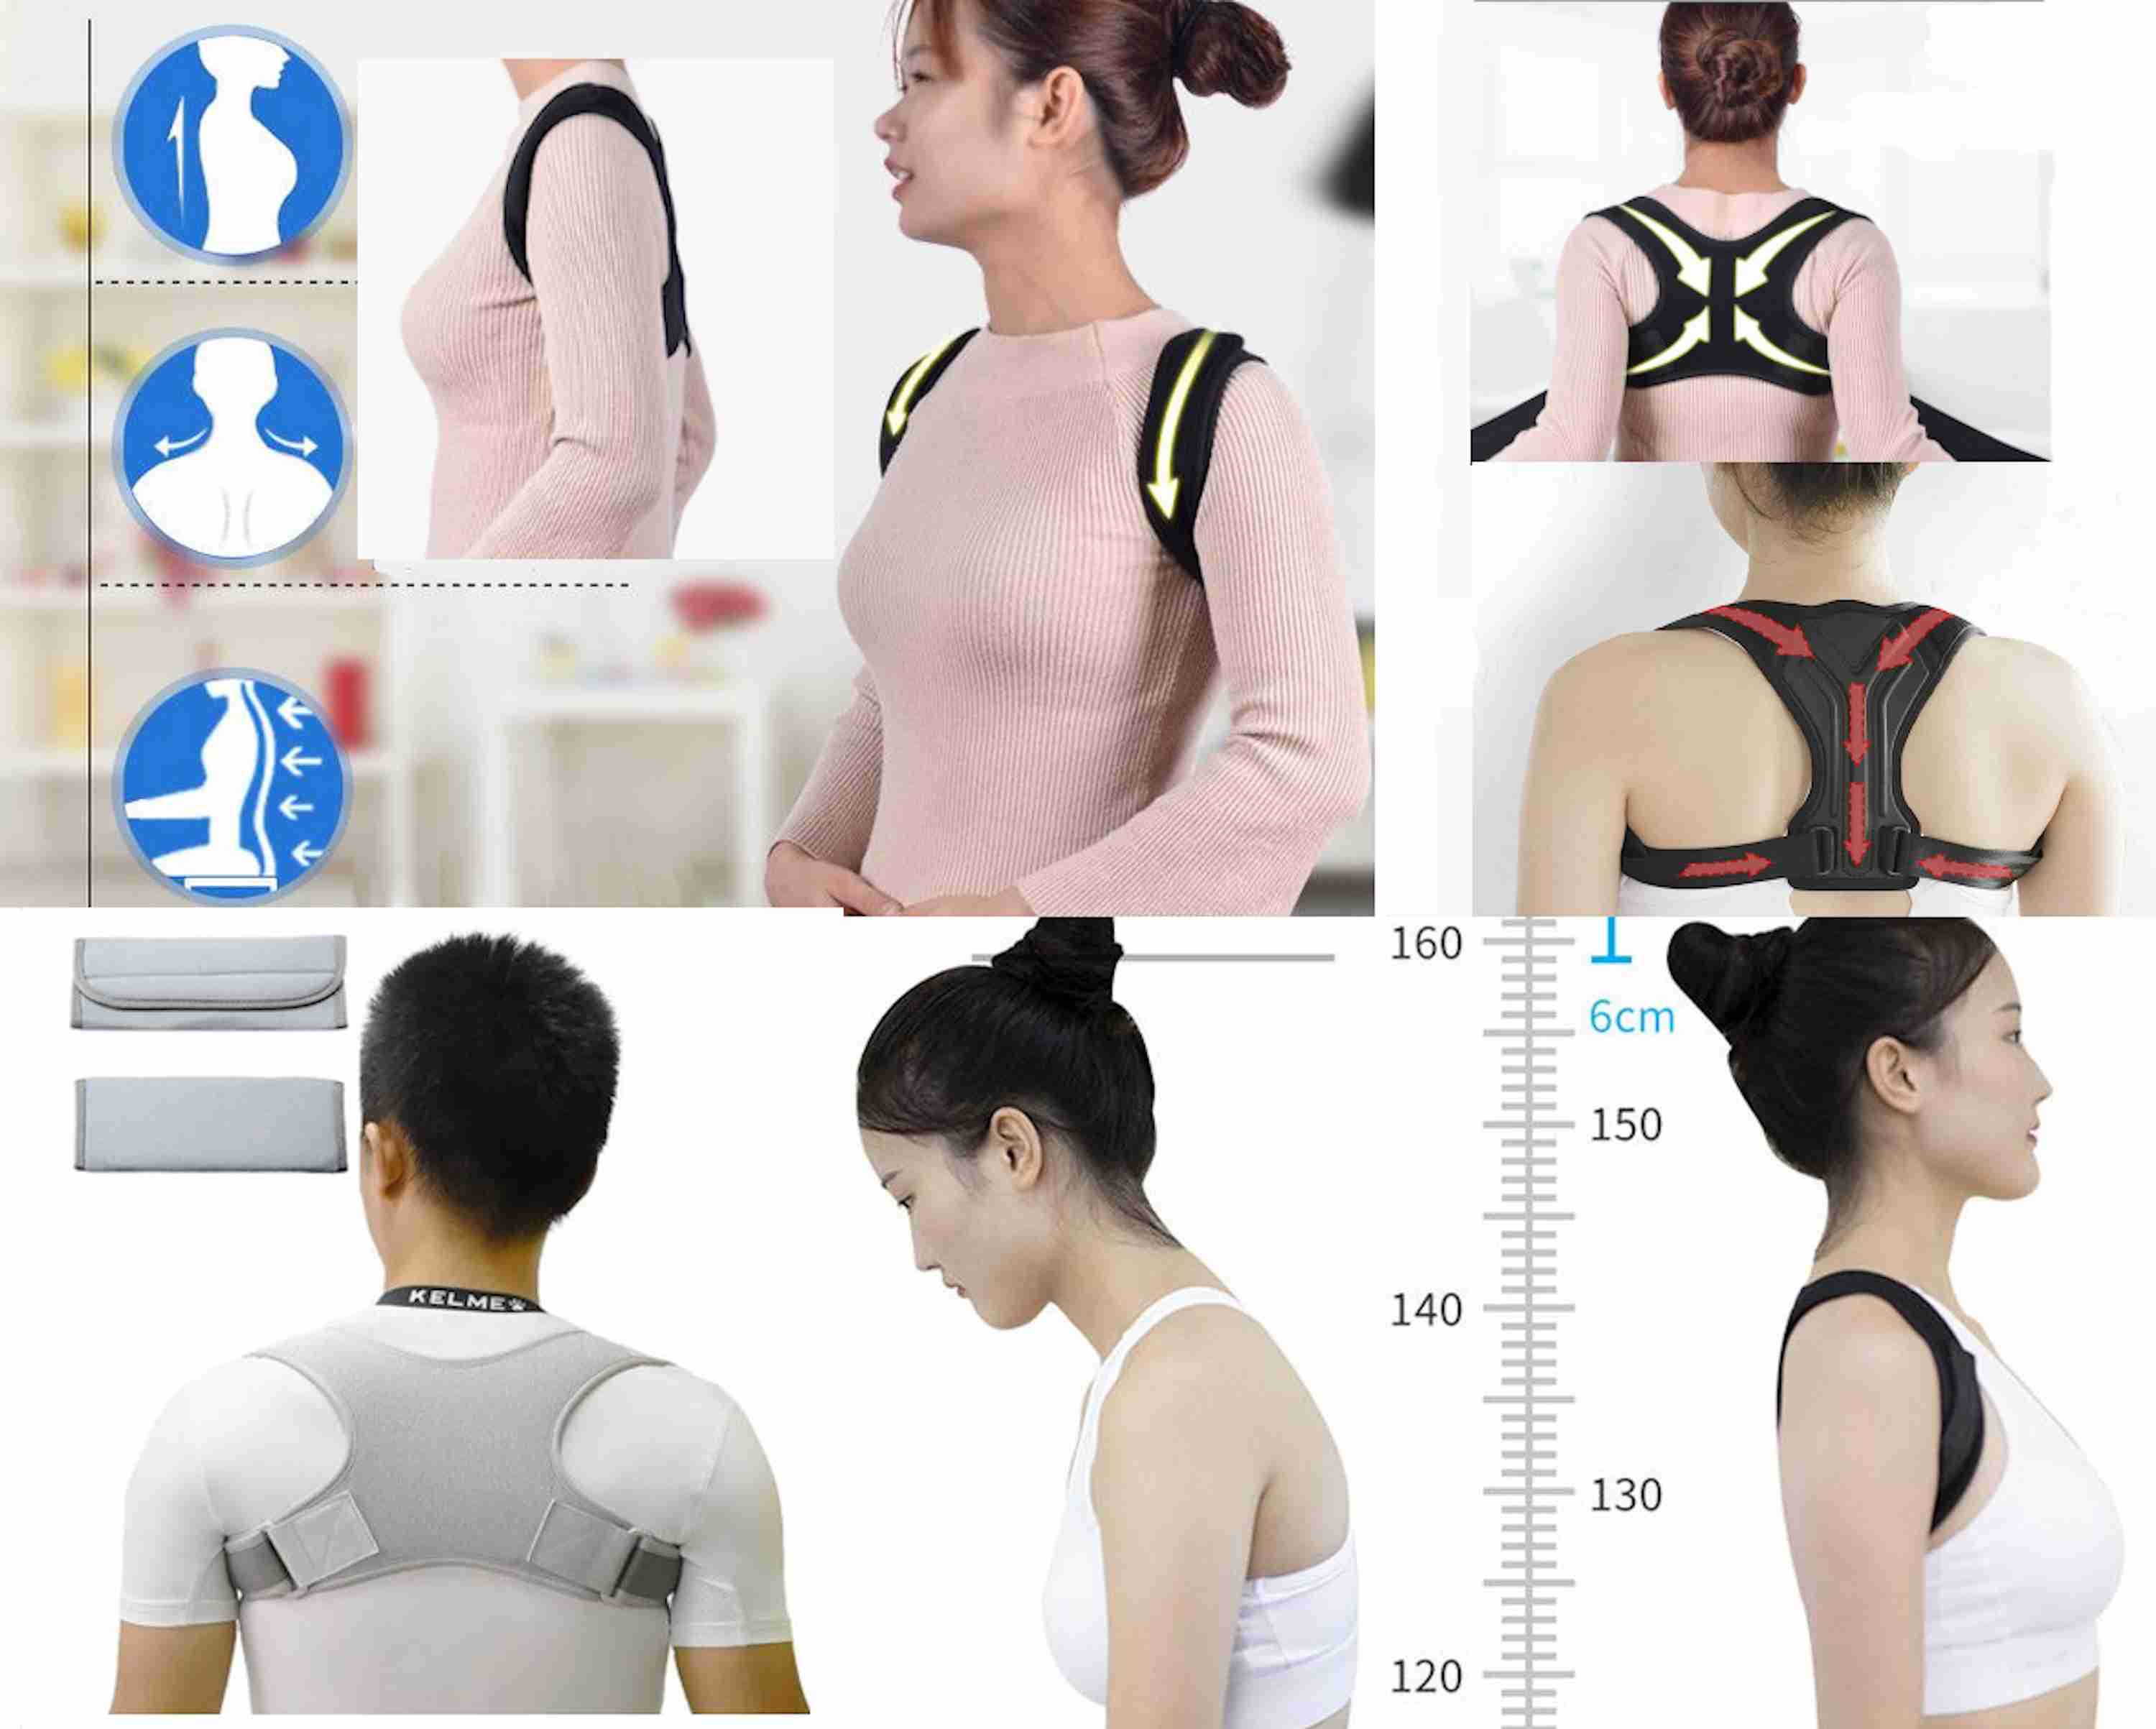 orthopedic corset for the correction of kyphosis of the thoracic spine